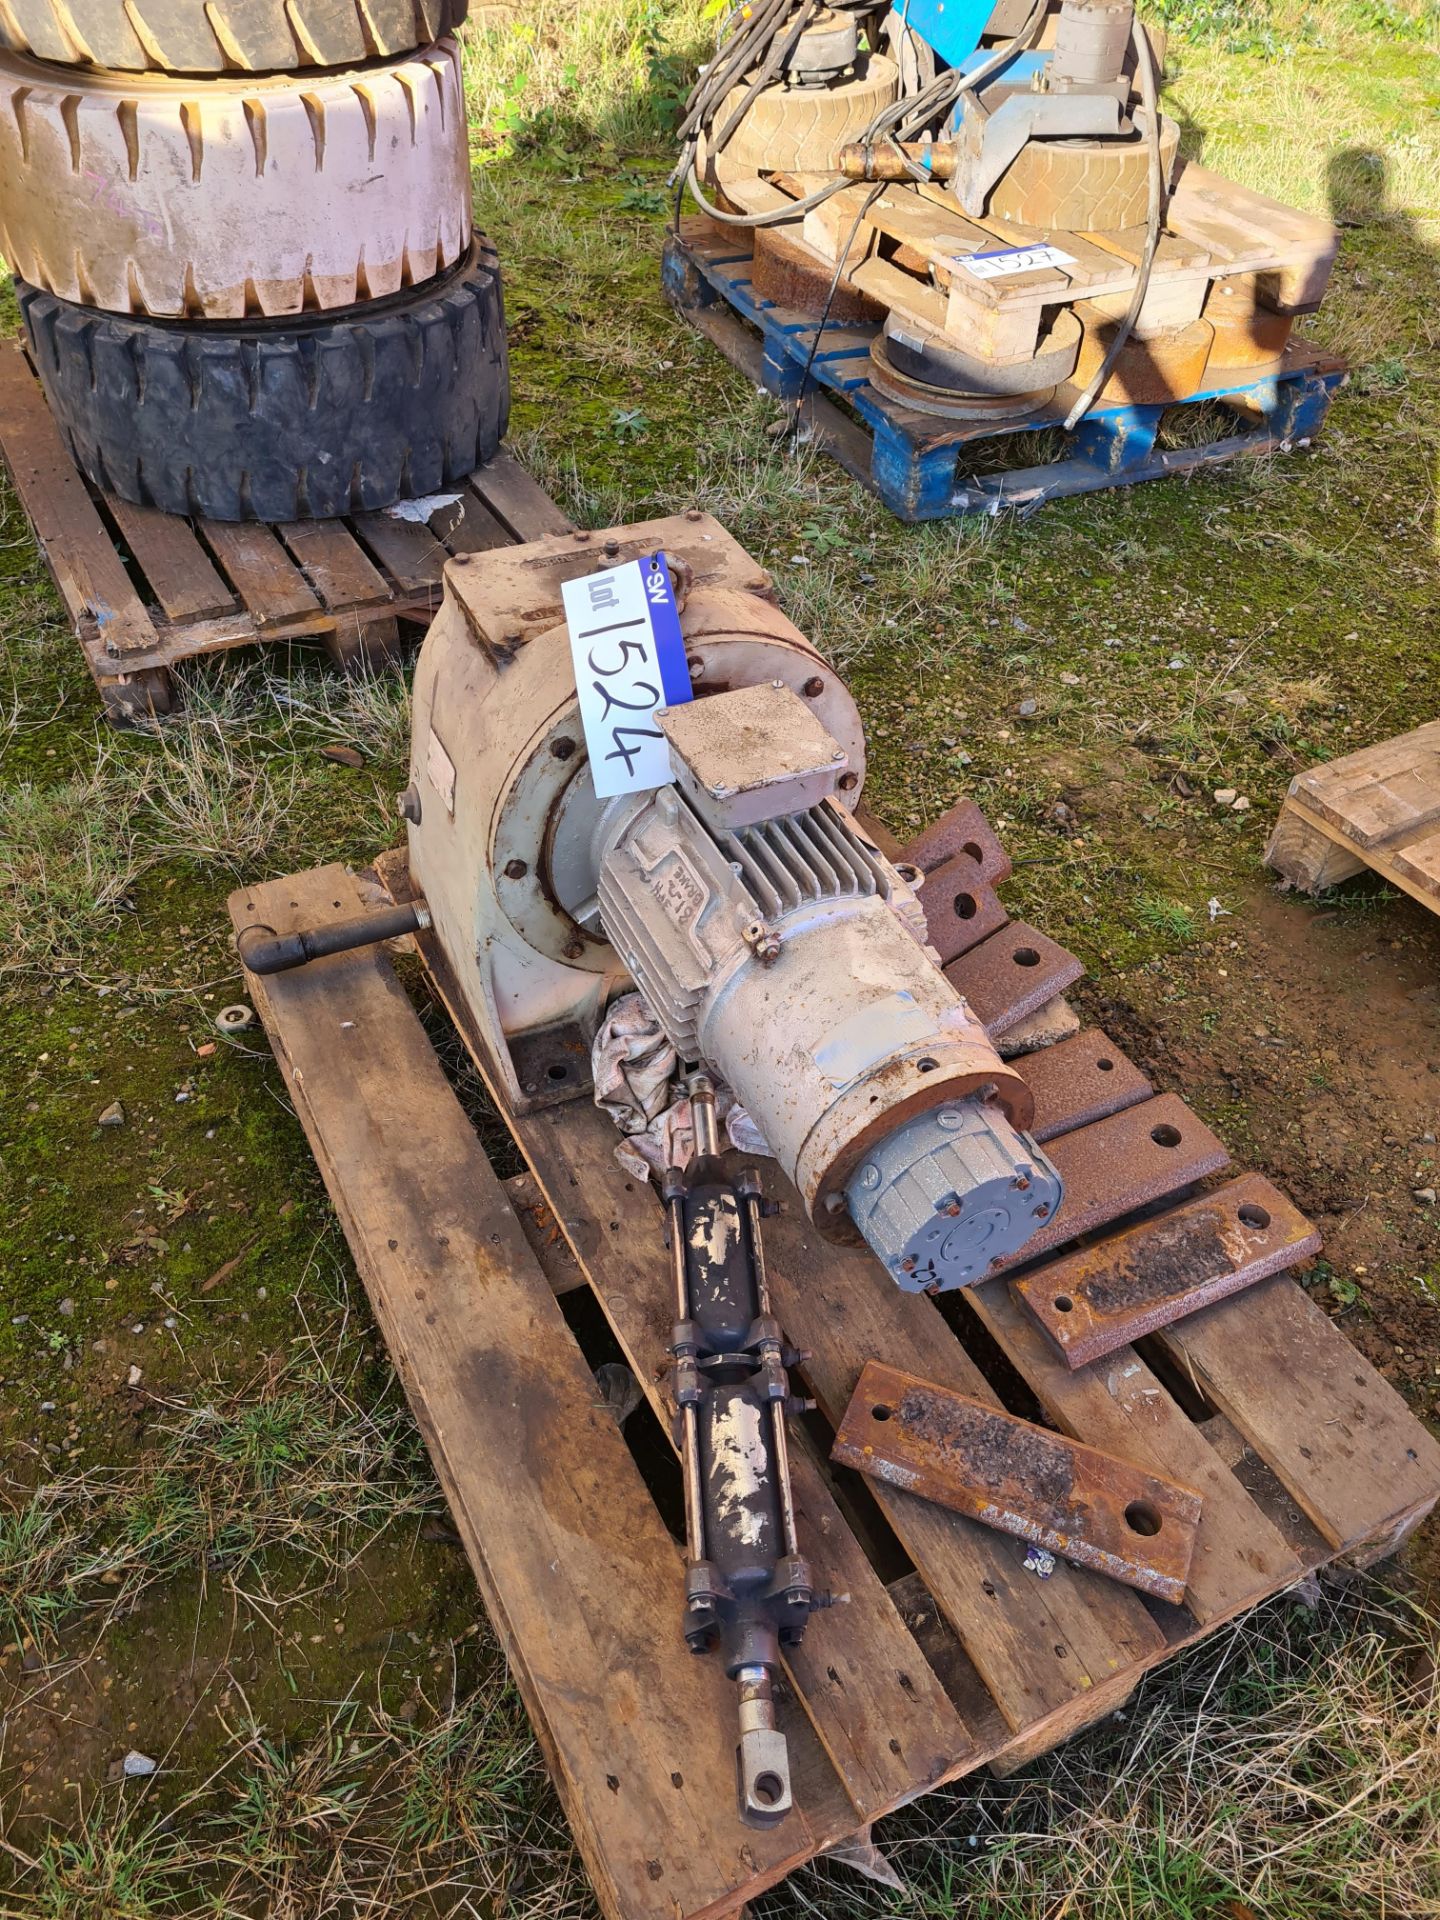 Electropower Gears Gearbox & Brooke Compton BS 5000-99 3 Phase Motor, as set out on palletPlease